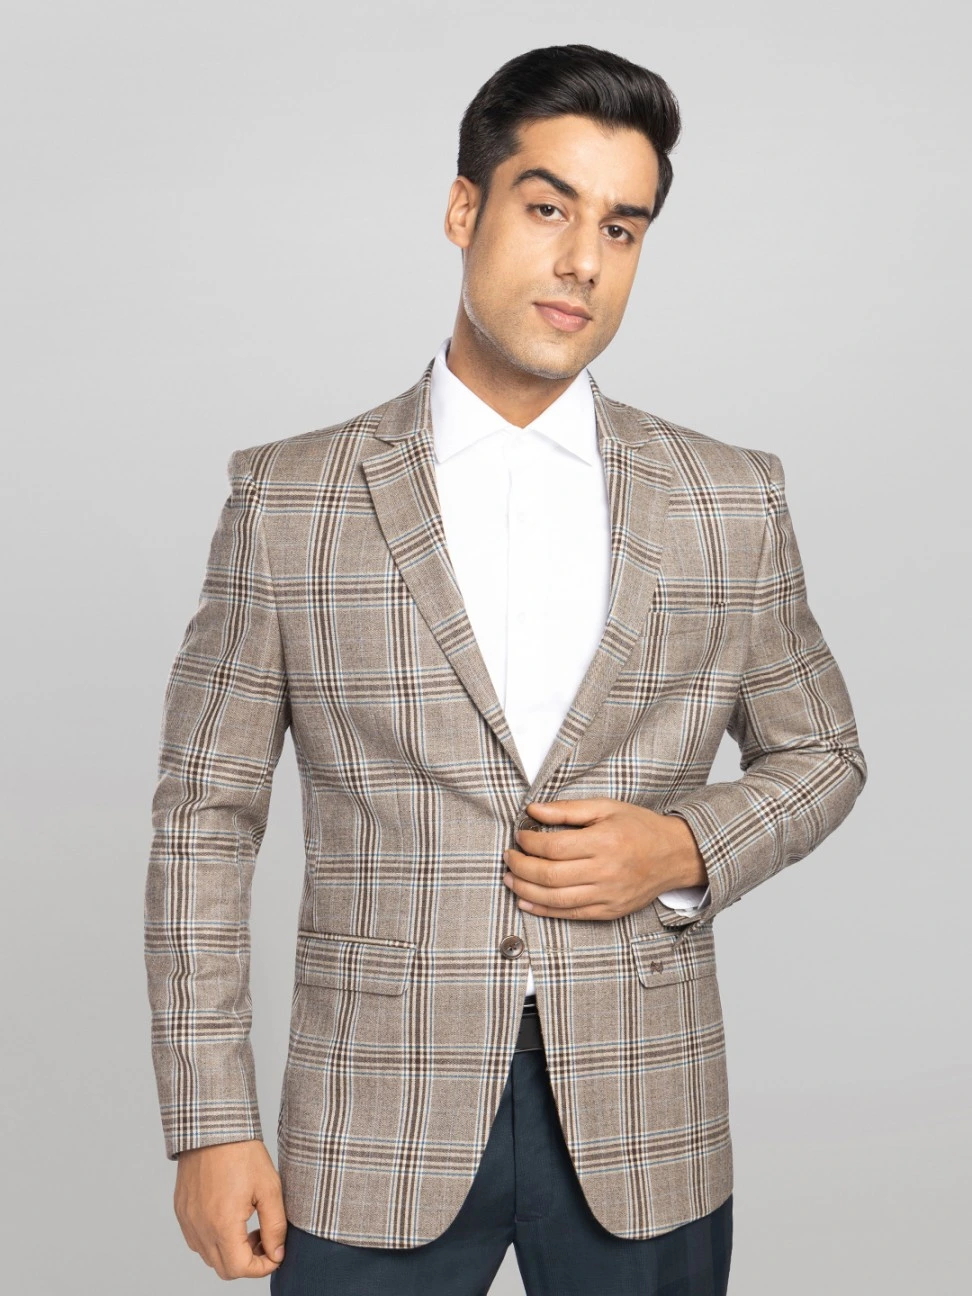 P N RAO Men's Checkered Jacket with Notch Lapel - Beige